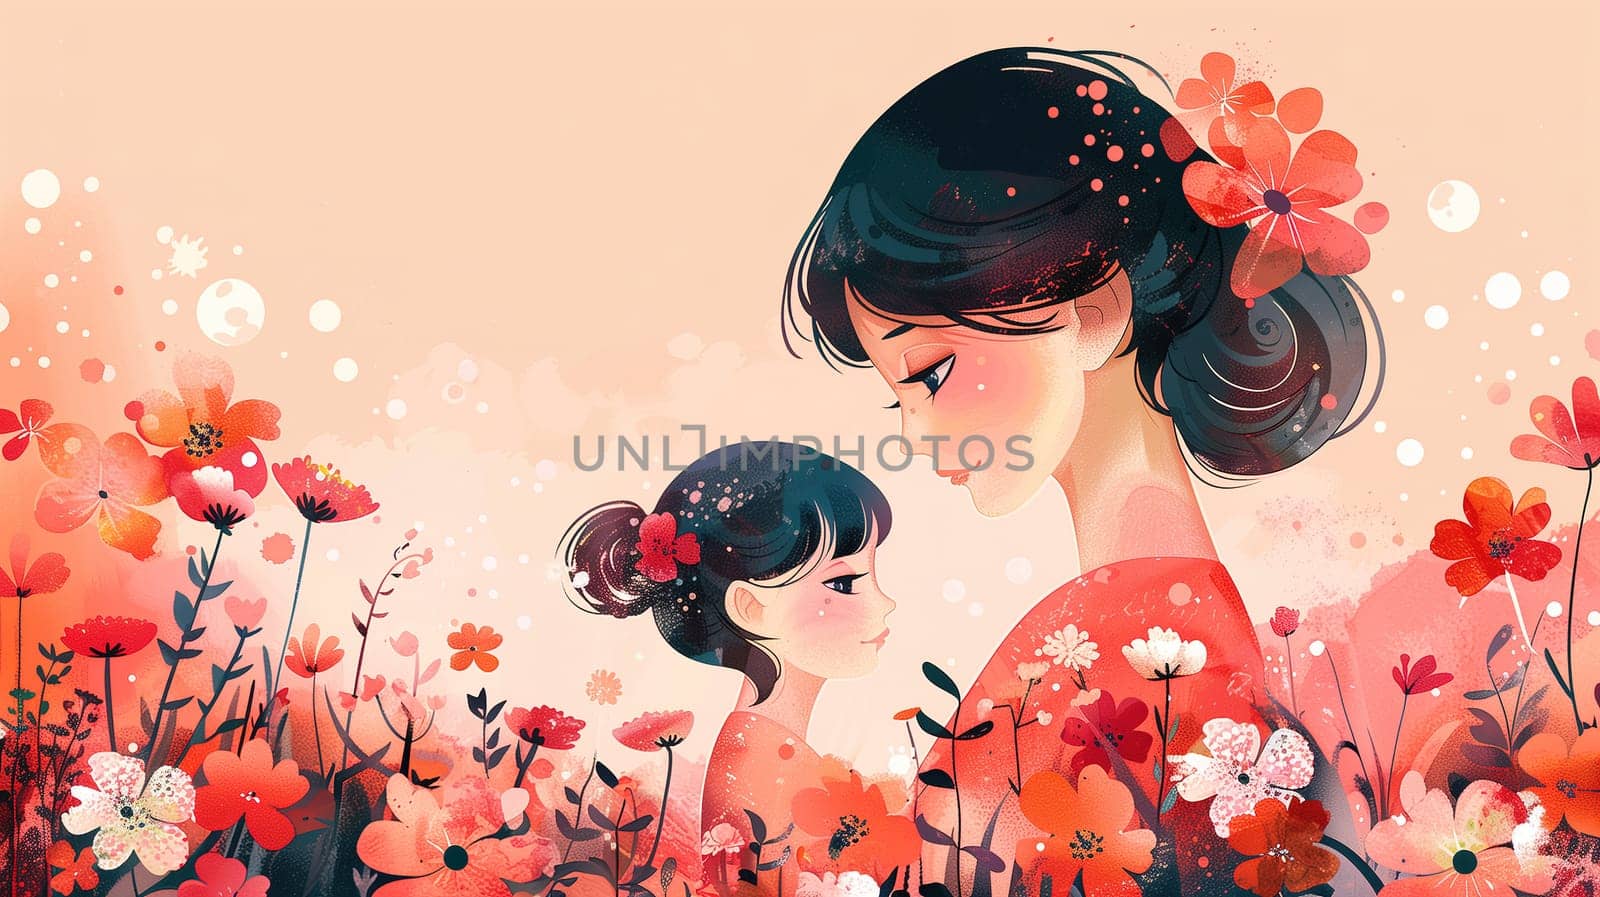 A painting depicting a woman and a child standing in a vibrant field of colorful wildflowers. The woman is holding the childs hand, looking down at them with a gentle expression. The child is gazing up at their mother with a sense of trust and security.